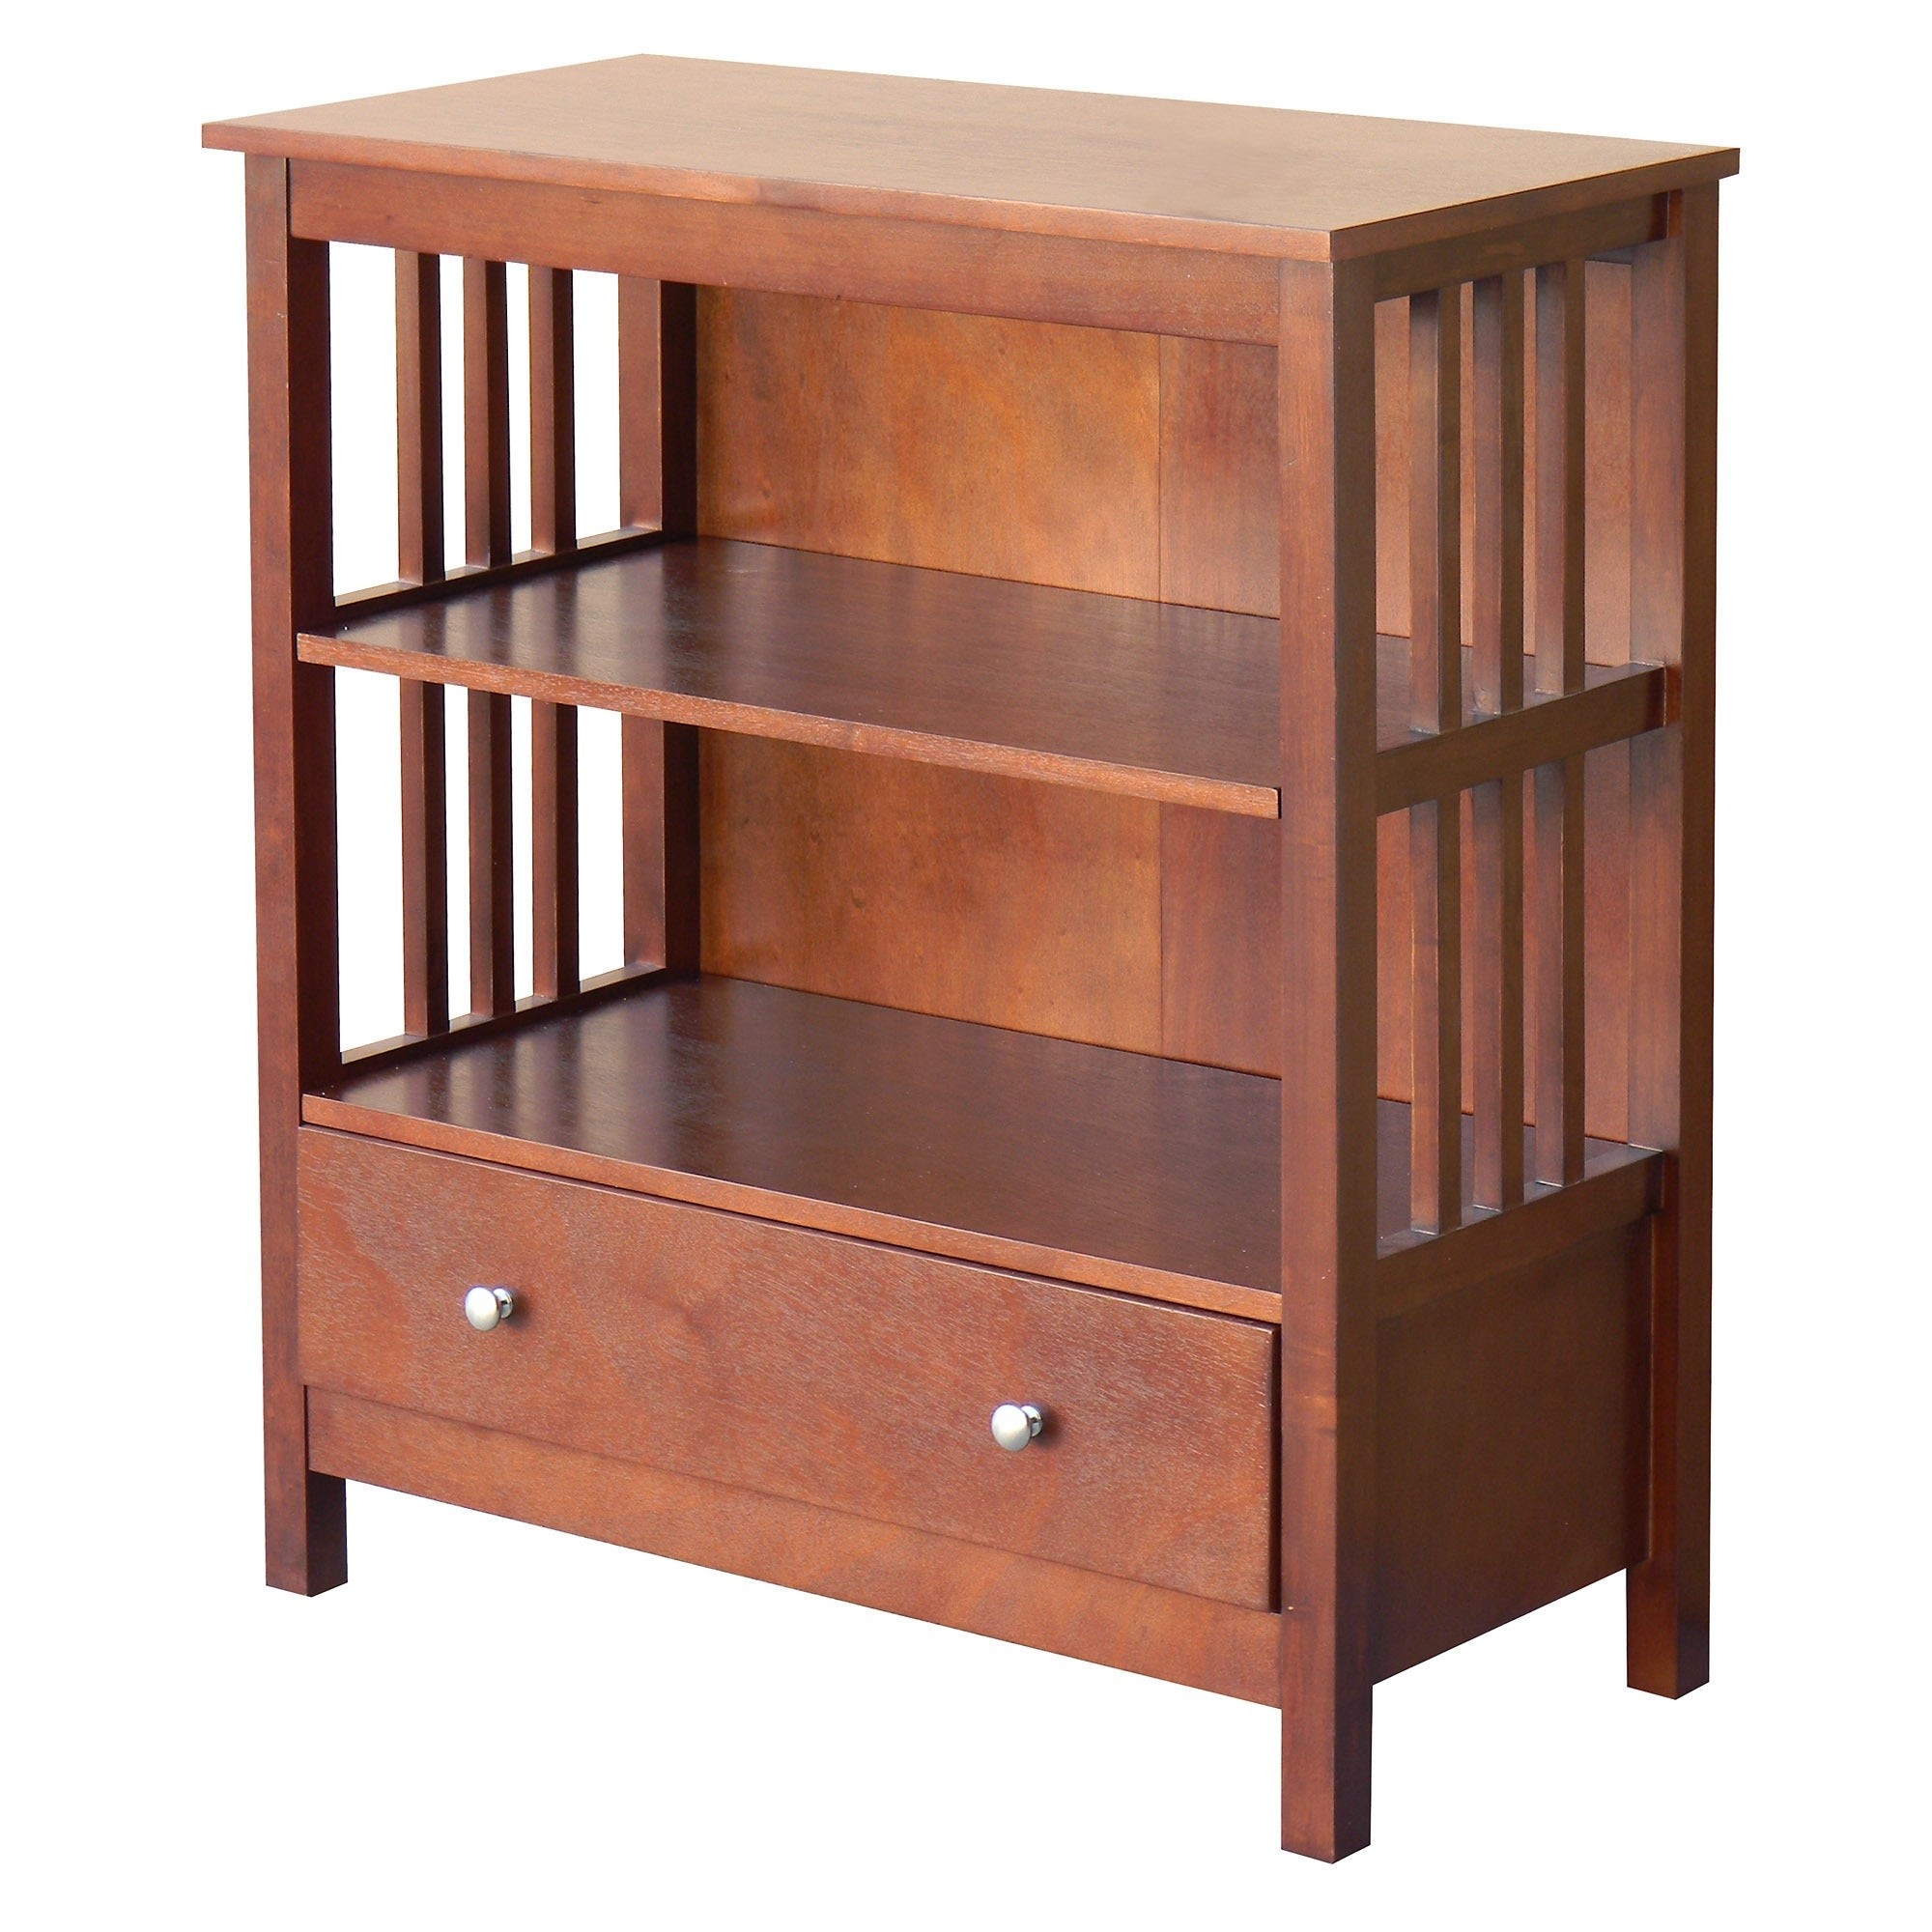 Hollydale chestnut mission style bookcase overstock